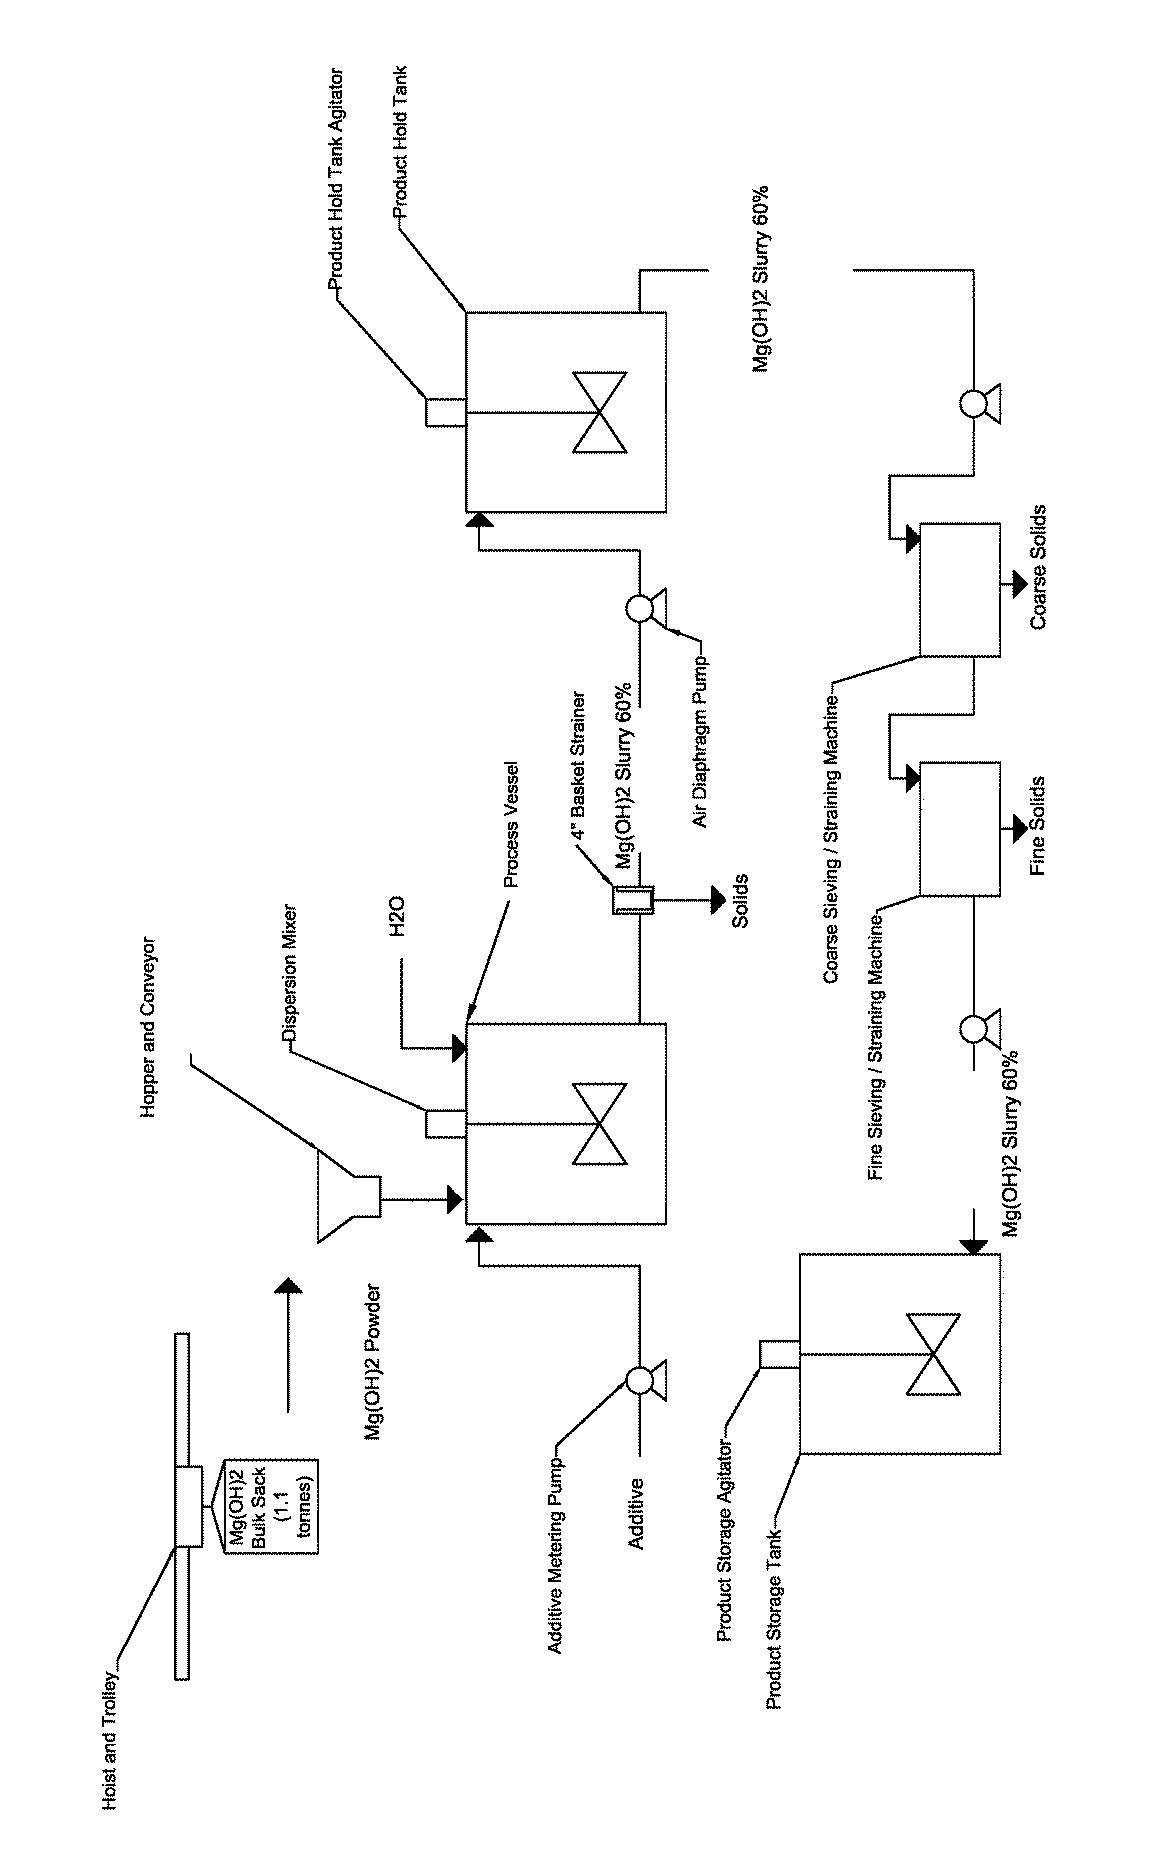 Process for producing a stabilized magnesium hydroxide slurry